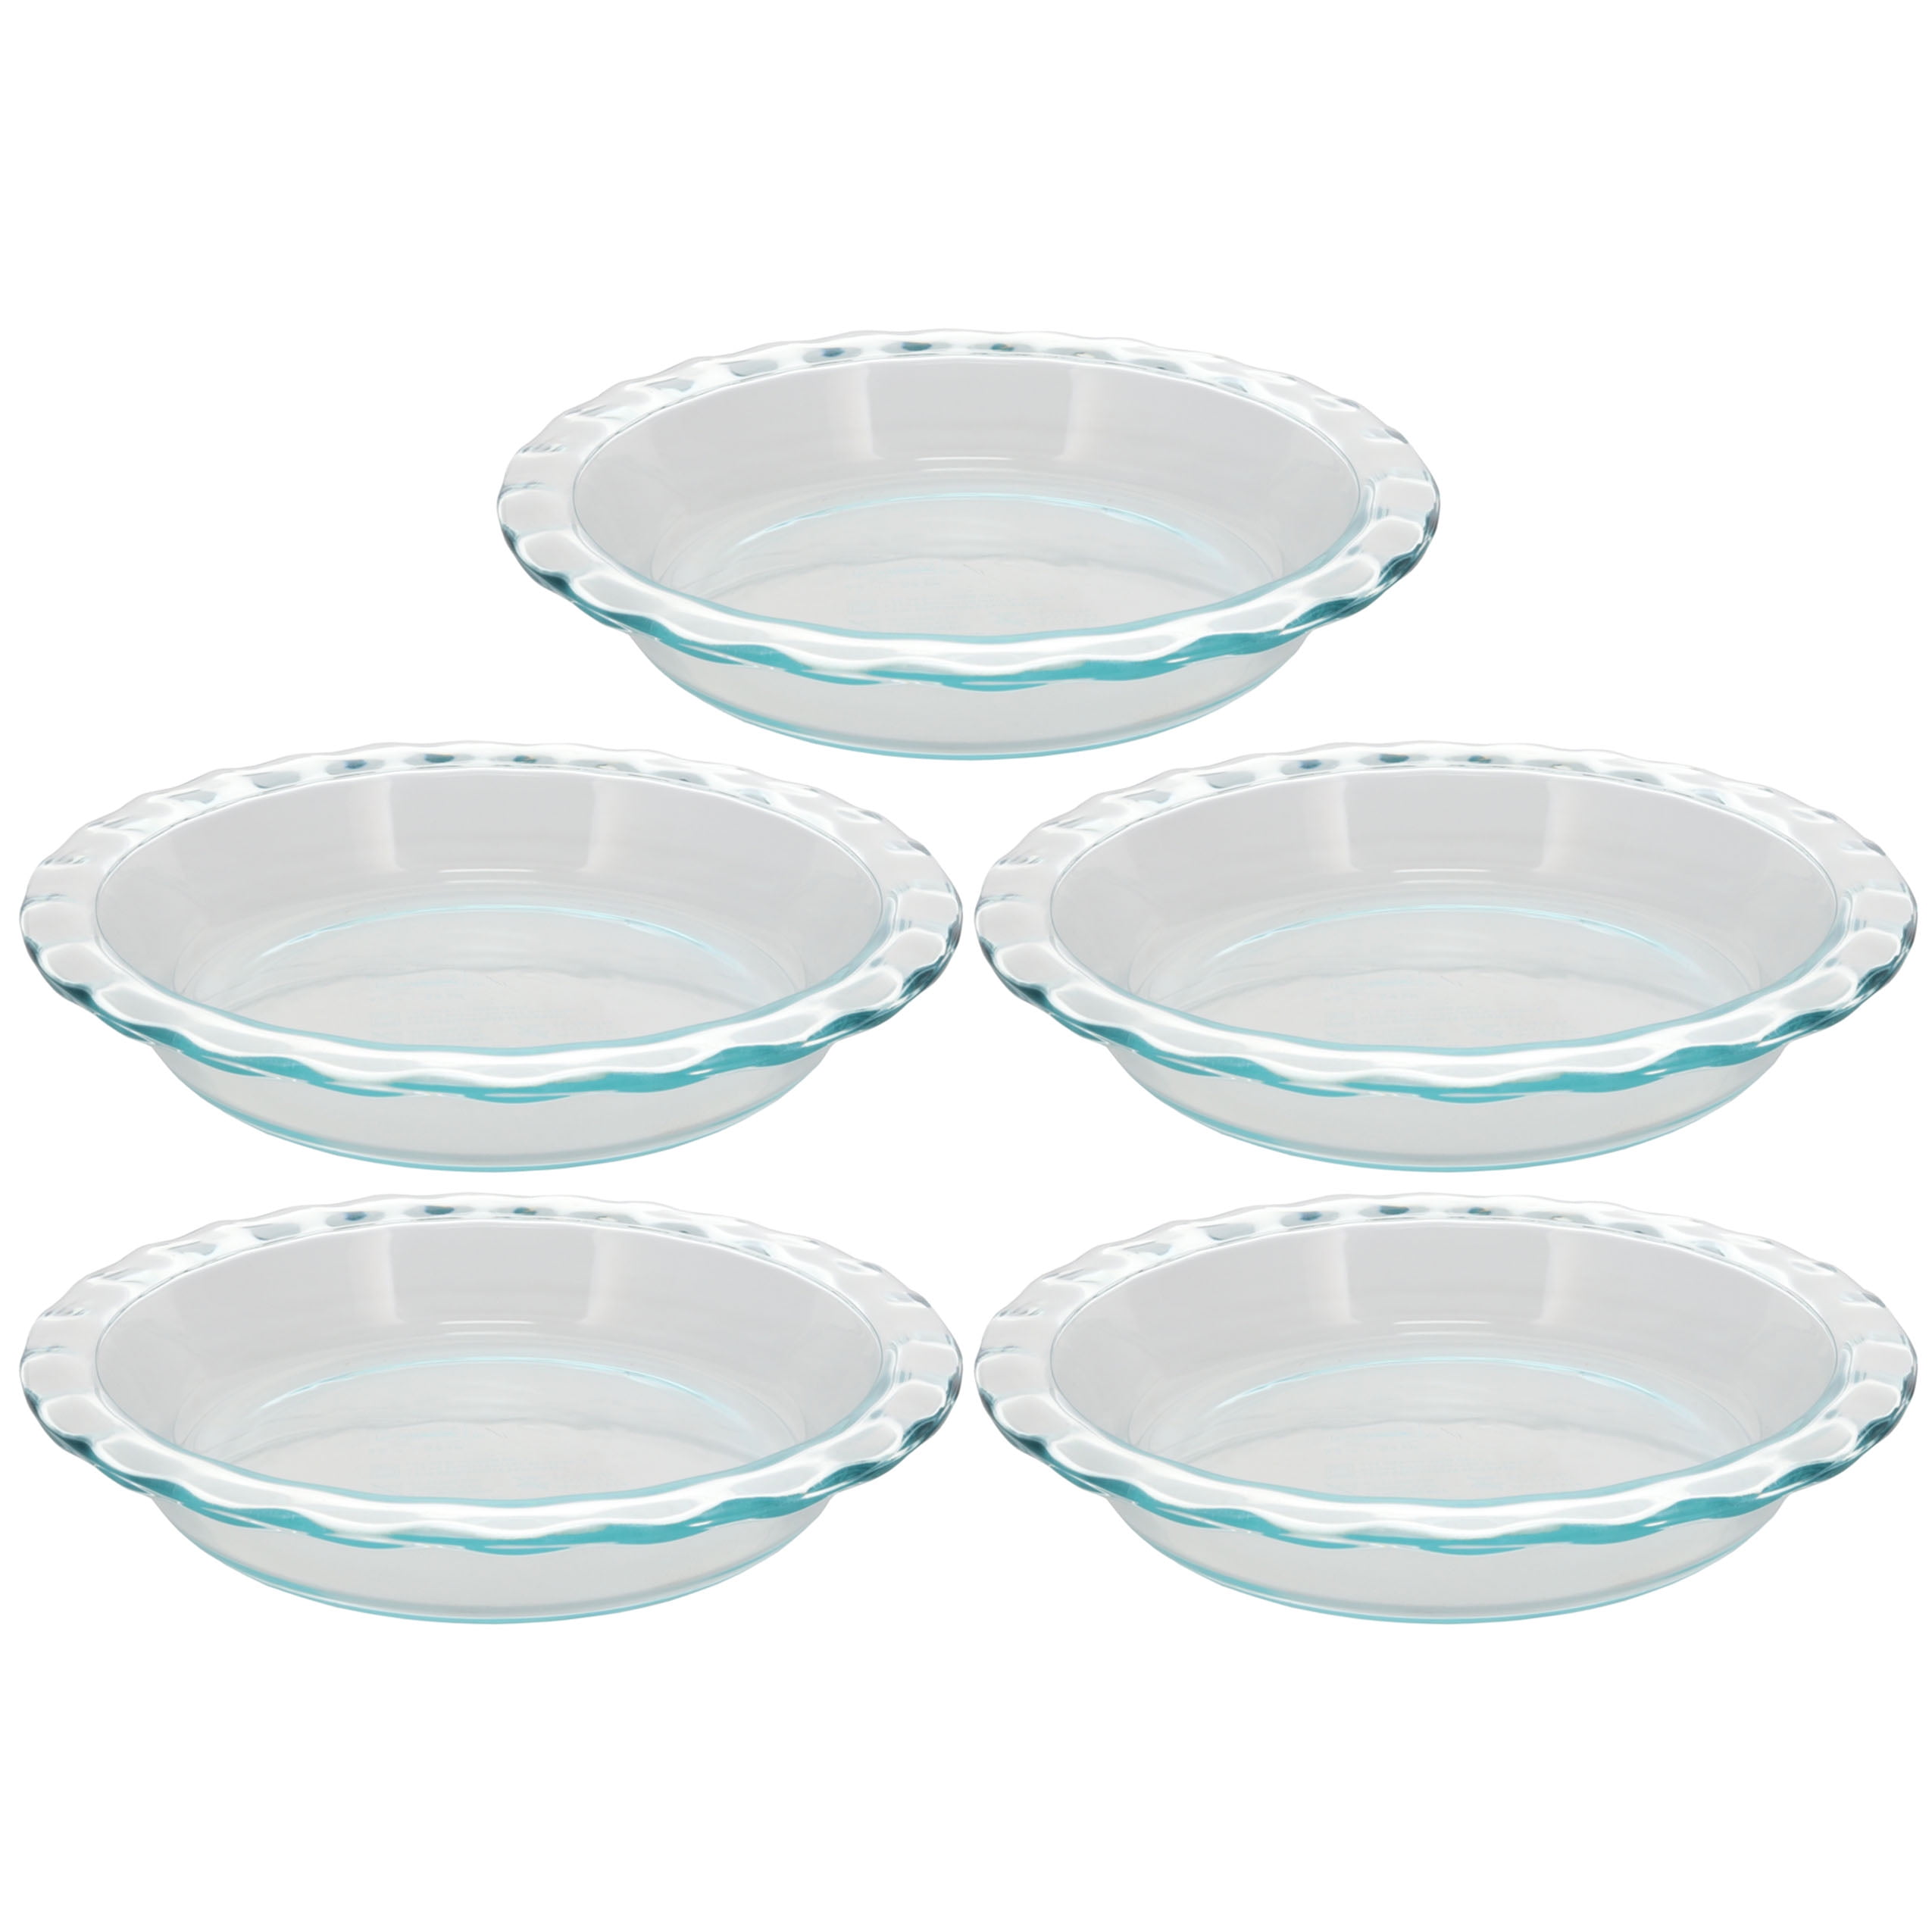 Glass Pie Plates 3 Pack Pyrex 9.5 inchex x 1.5 inches 